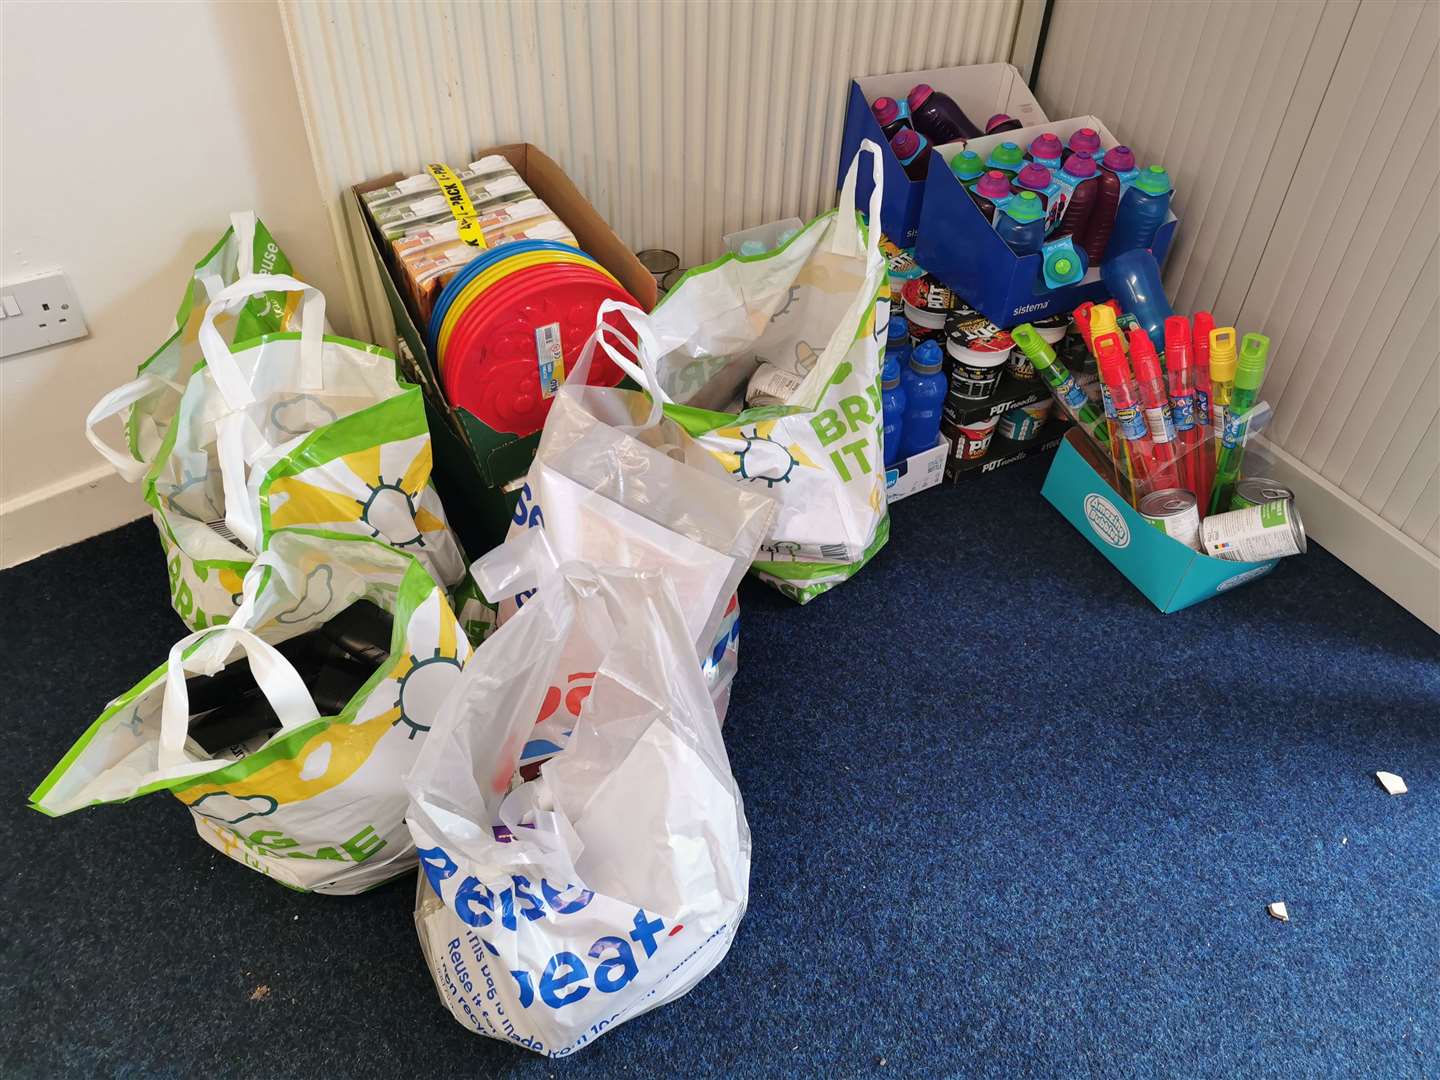 Six carrier bags filled with supplies were handed over to the food bank.